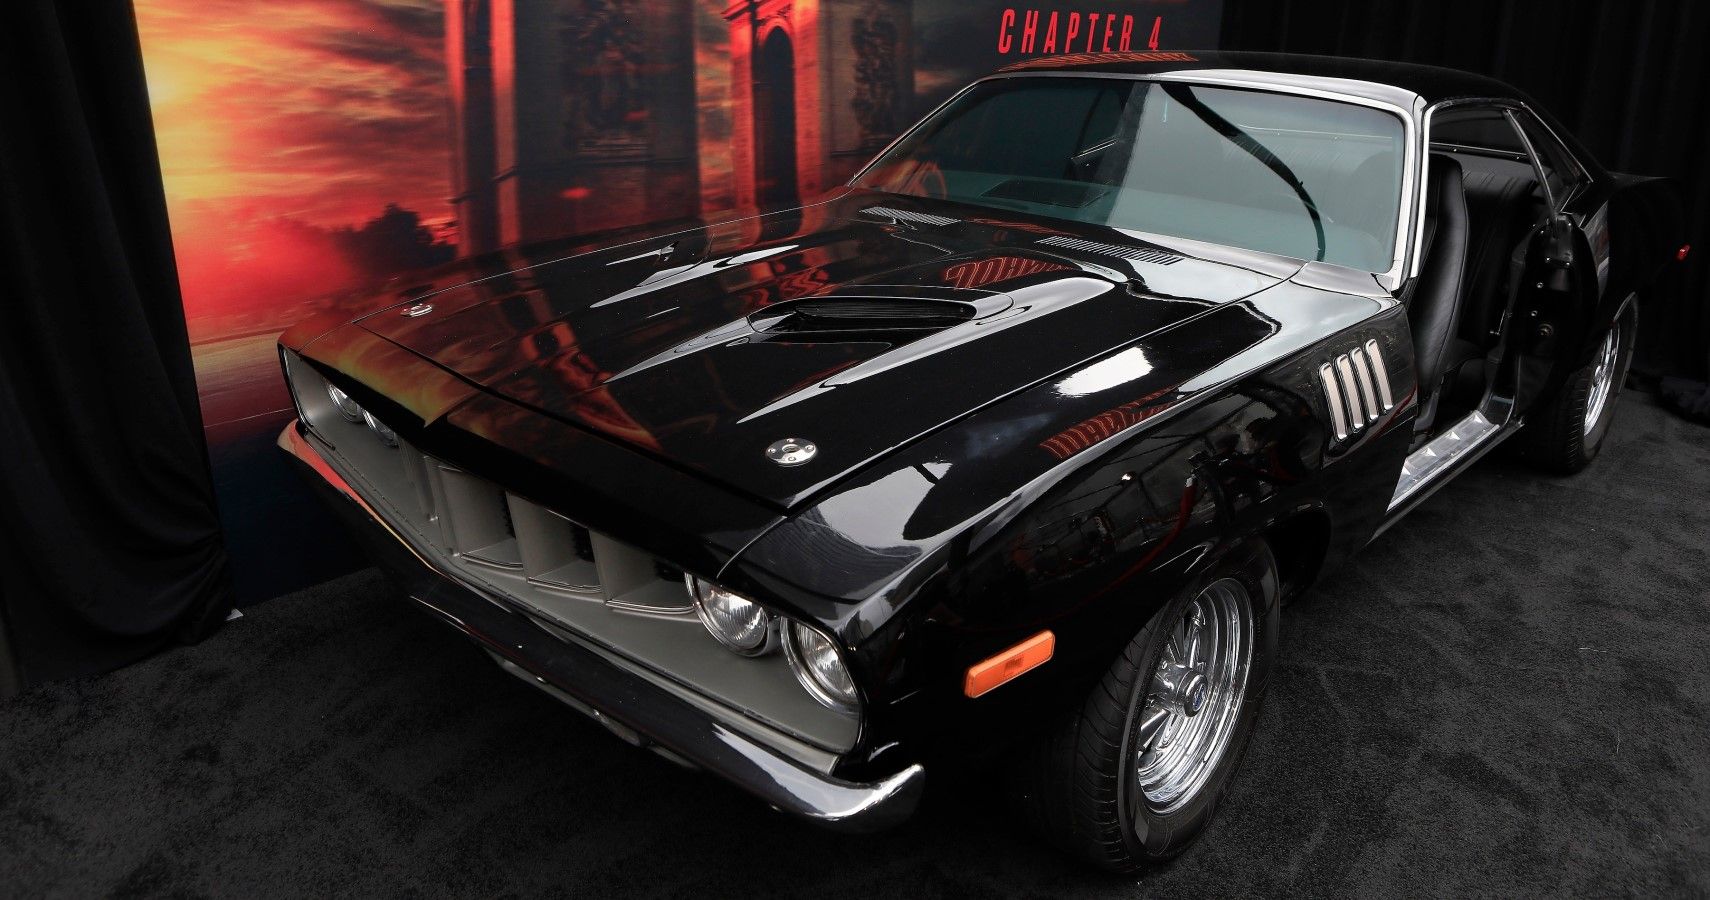 1971 Plymouth Barracuda from John Wick 4 front third quarter view